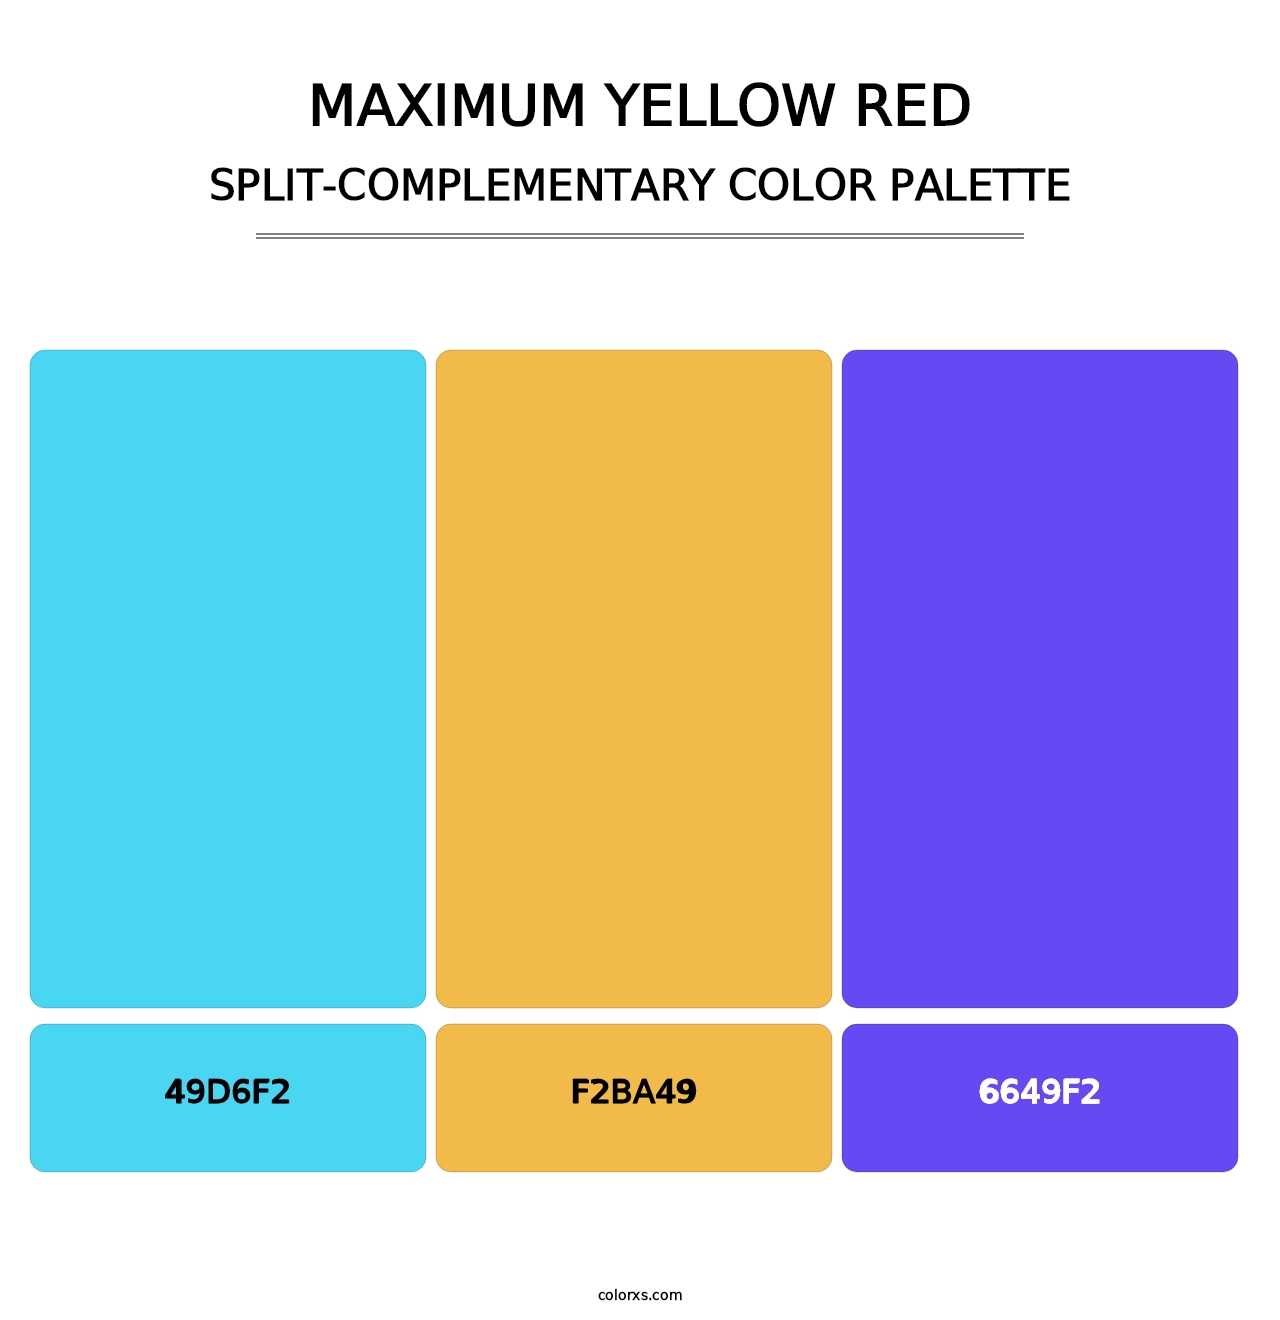 Maximum Yellow Red - Split-Complementary Color Palette